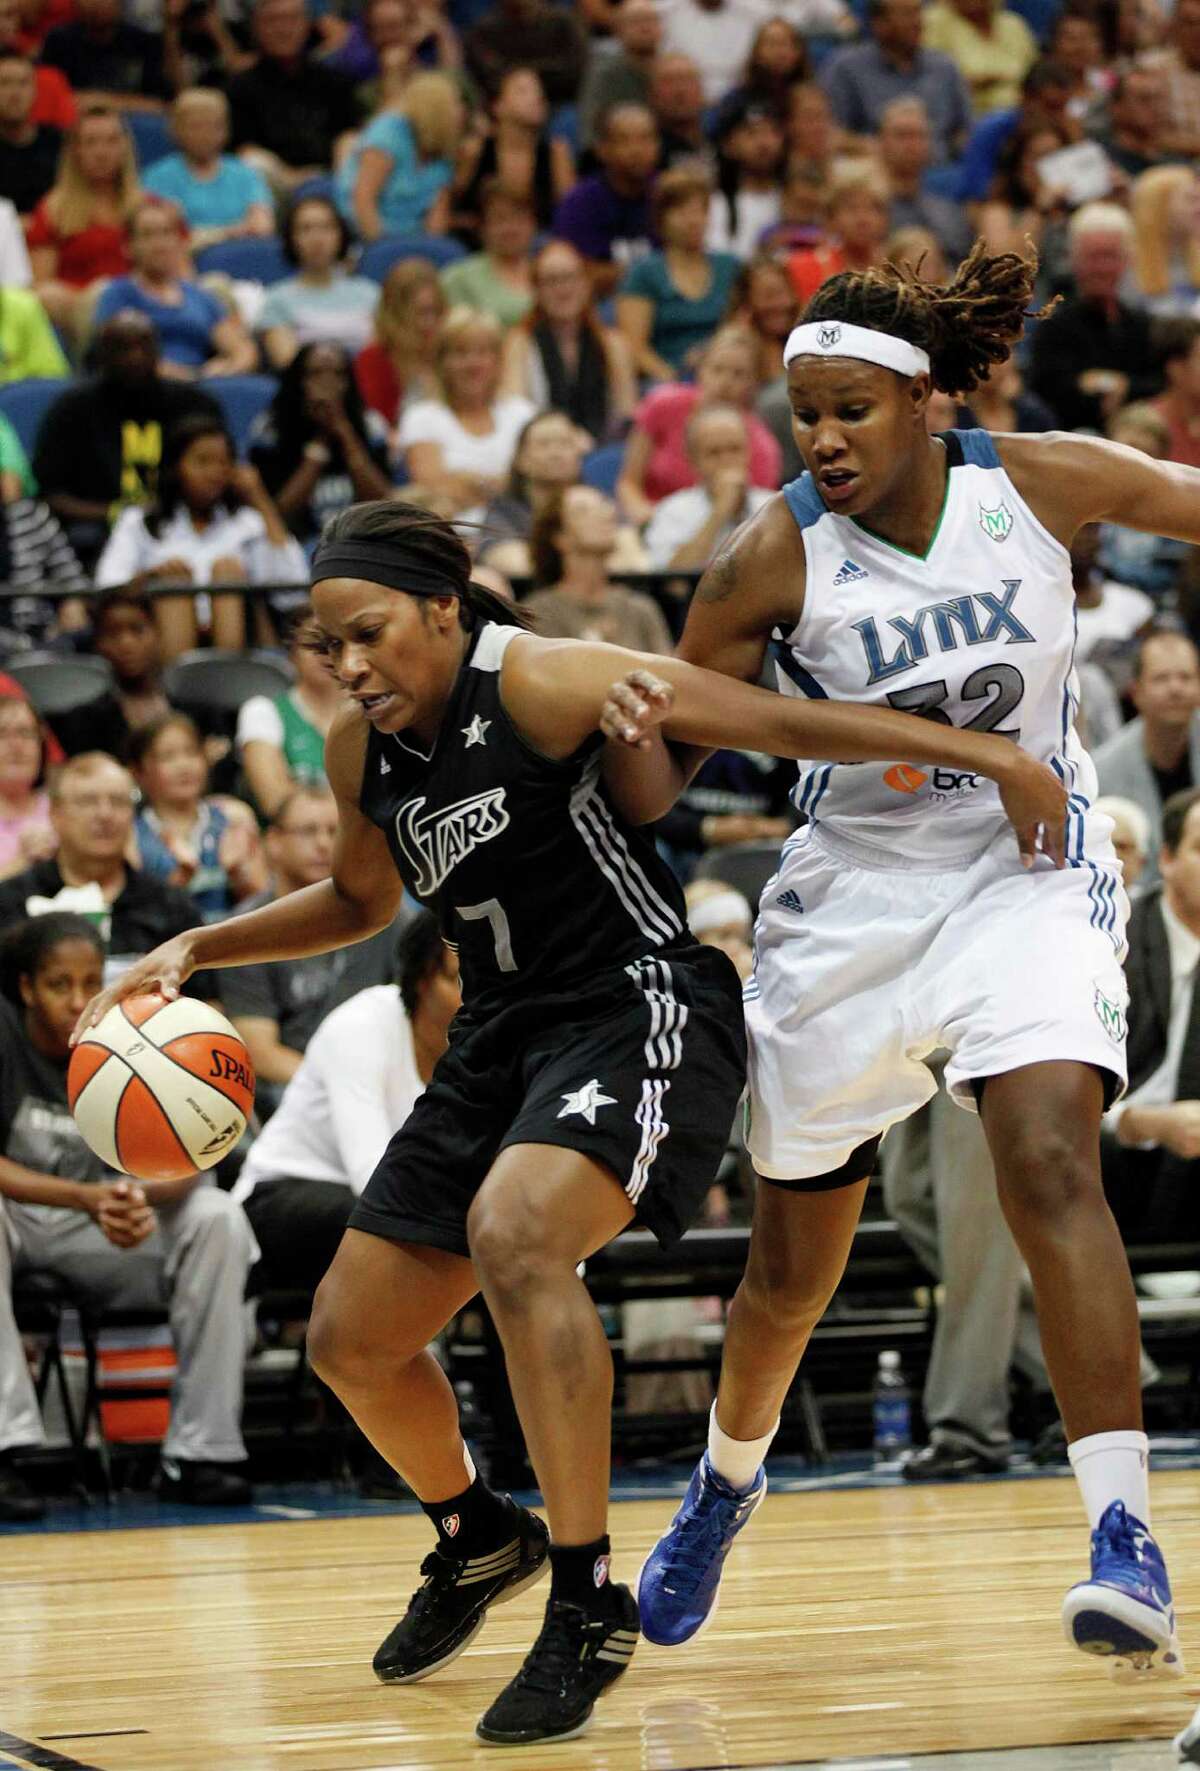 San Antonio Silver Stars guard Jia Perkins (7) tries to keep the ball in bounds against Minnesota Lynx forward Rebekkah Brunson (32) in the second half of a WNBA basketball game, Tuesday, Aug. 28, 2012, in Minneapolis. The Lynx won in overtime 96-84. AP Photo/Stacy Bengs